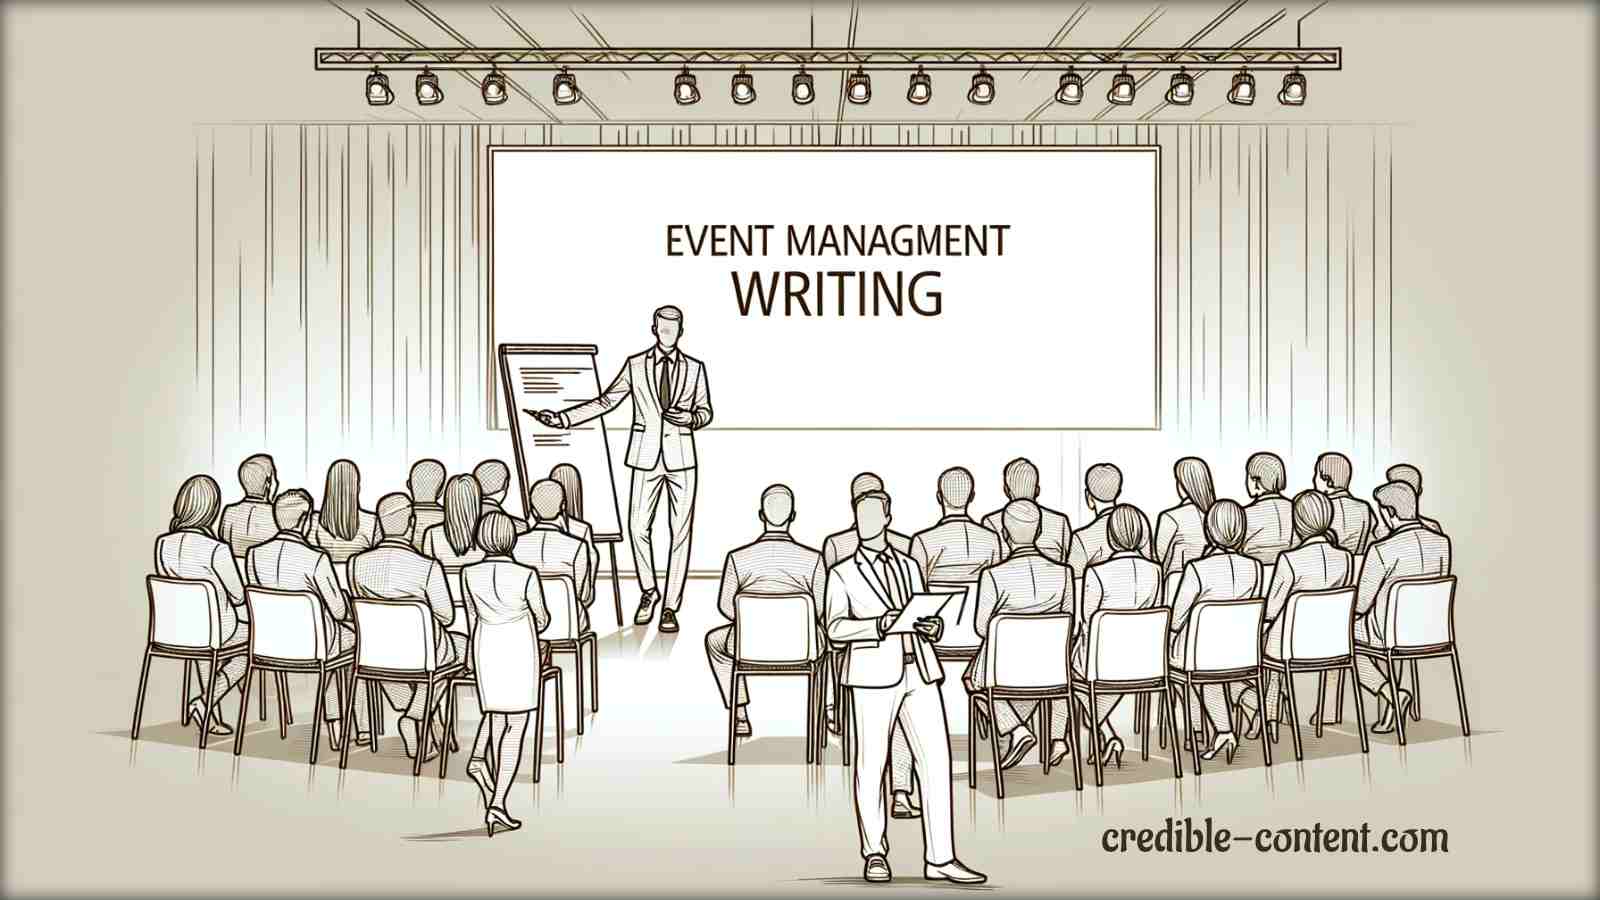 Content writing service for event management